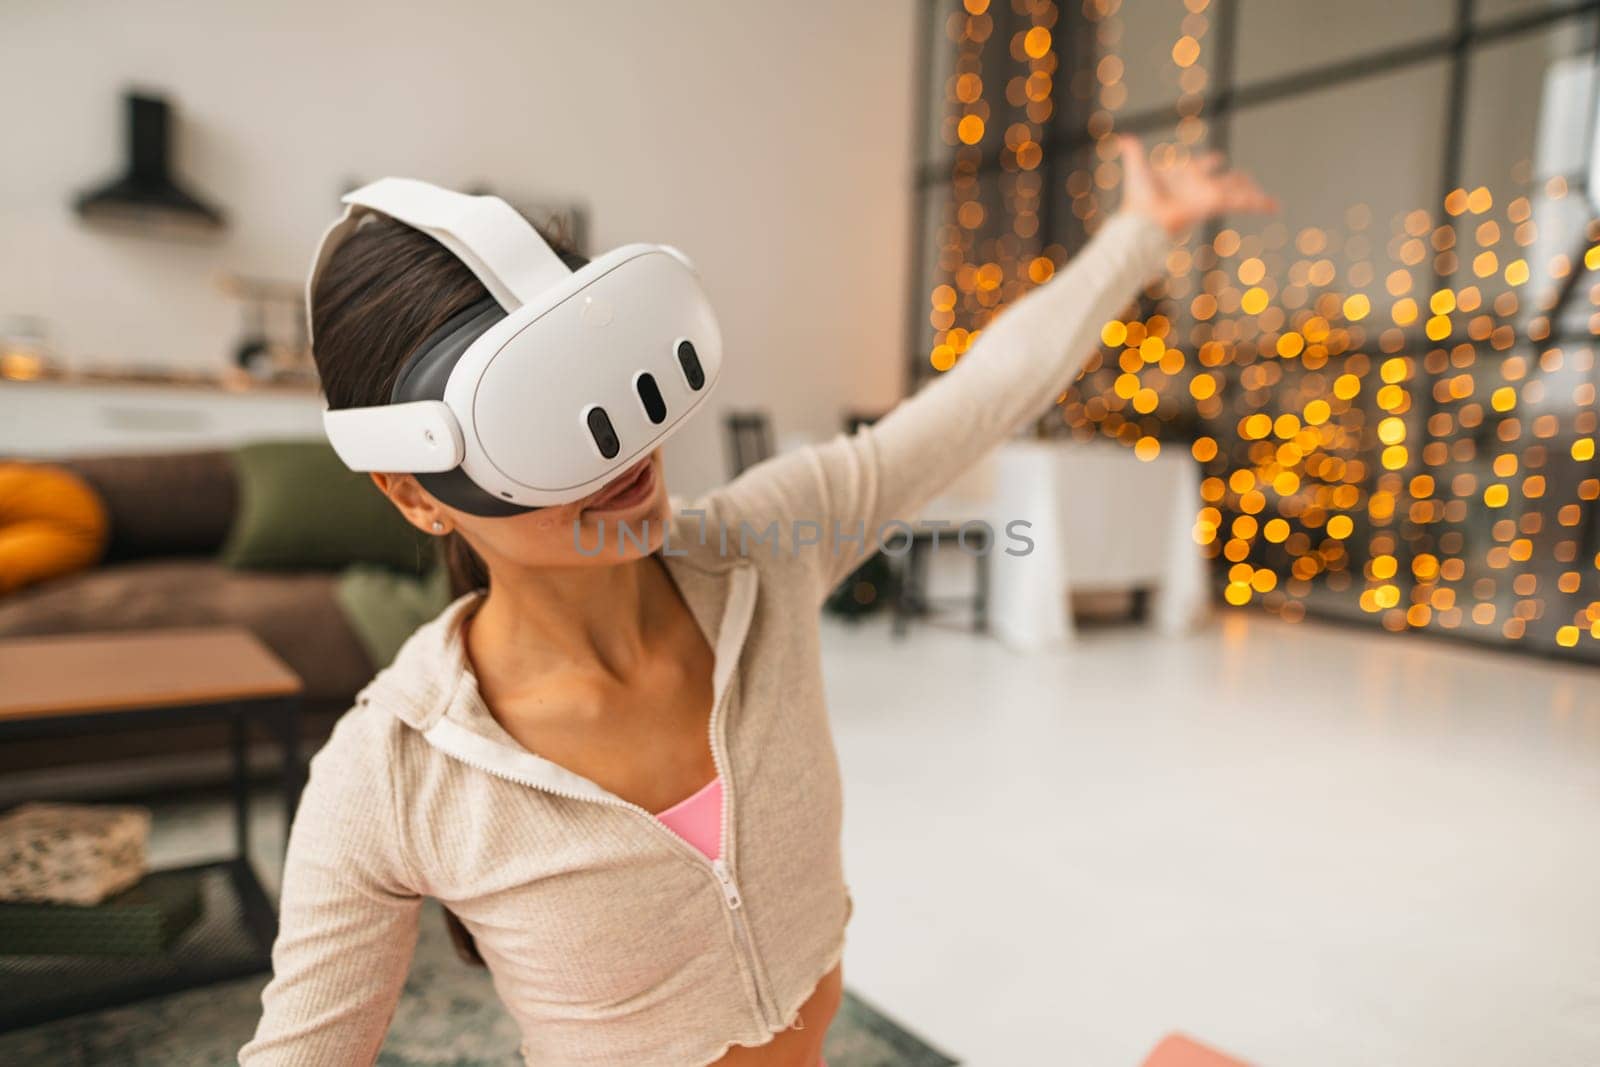 Using a virtual reality headset, a fitness trainer conducts online workout sessions at home during the Christmas holiday season. by teksomolika